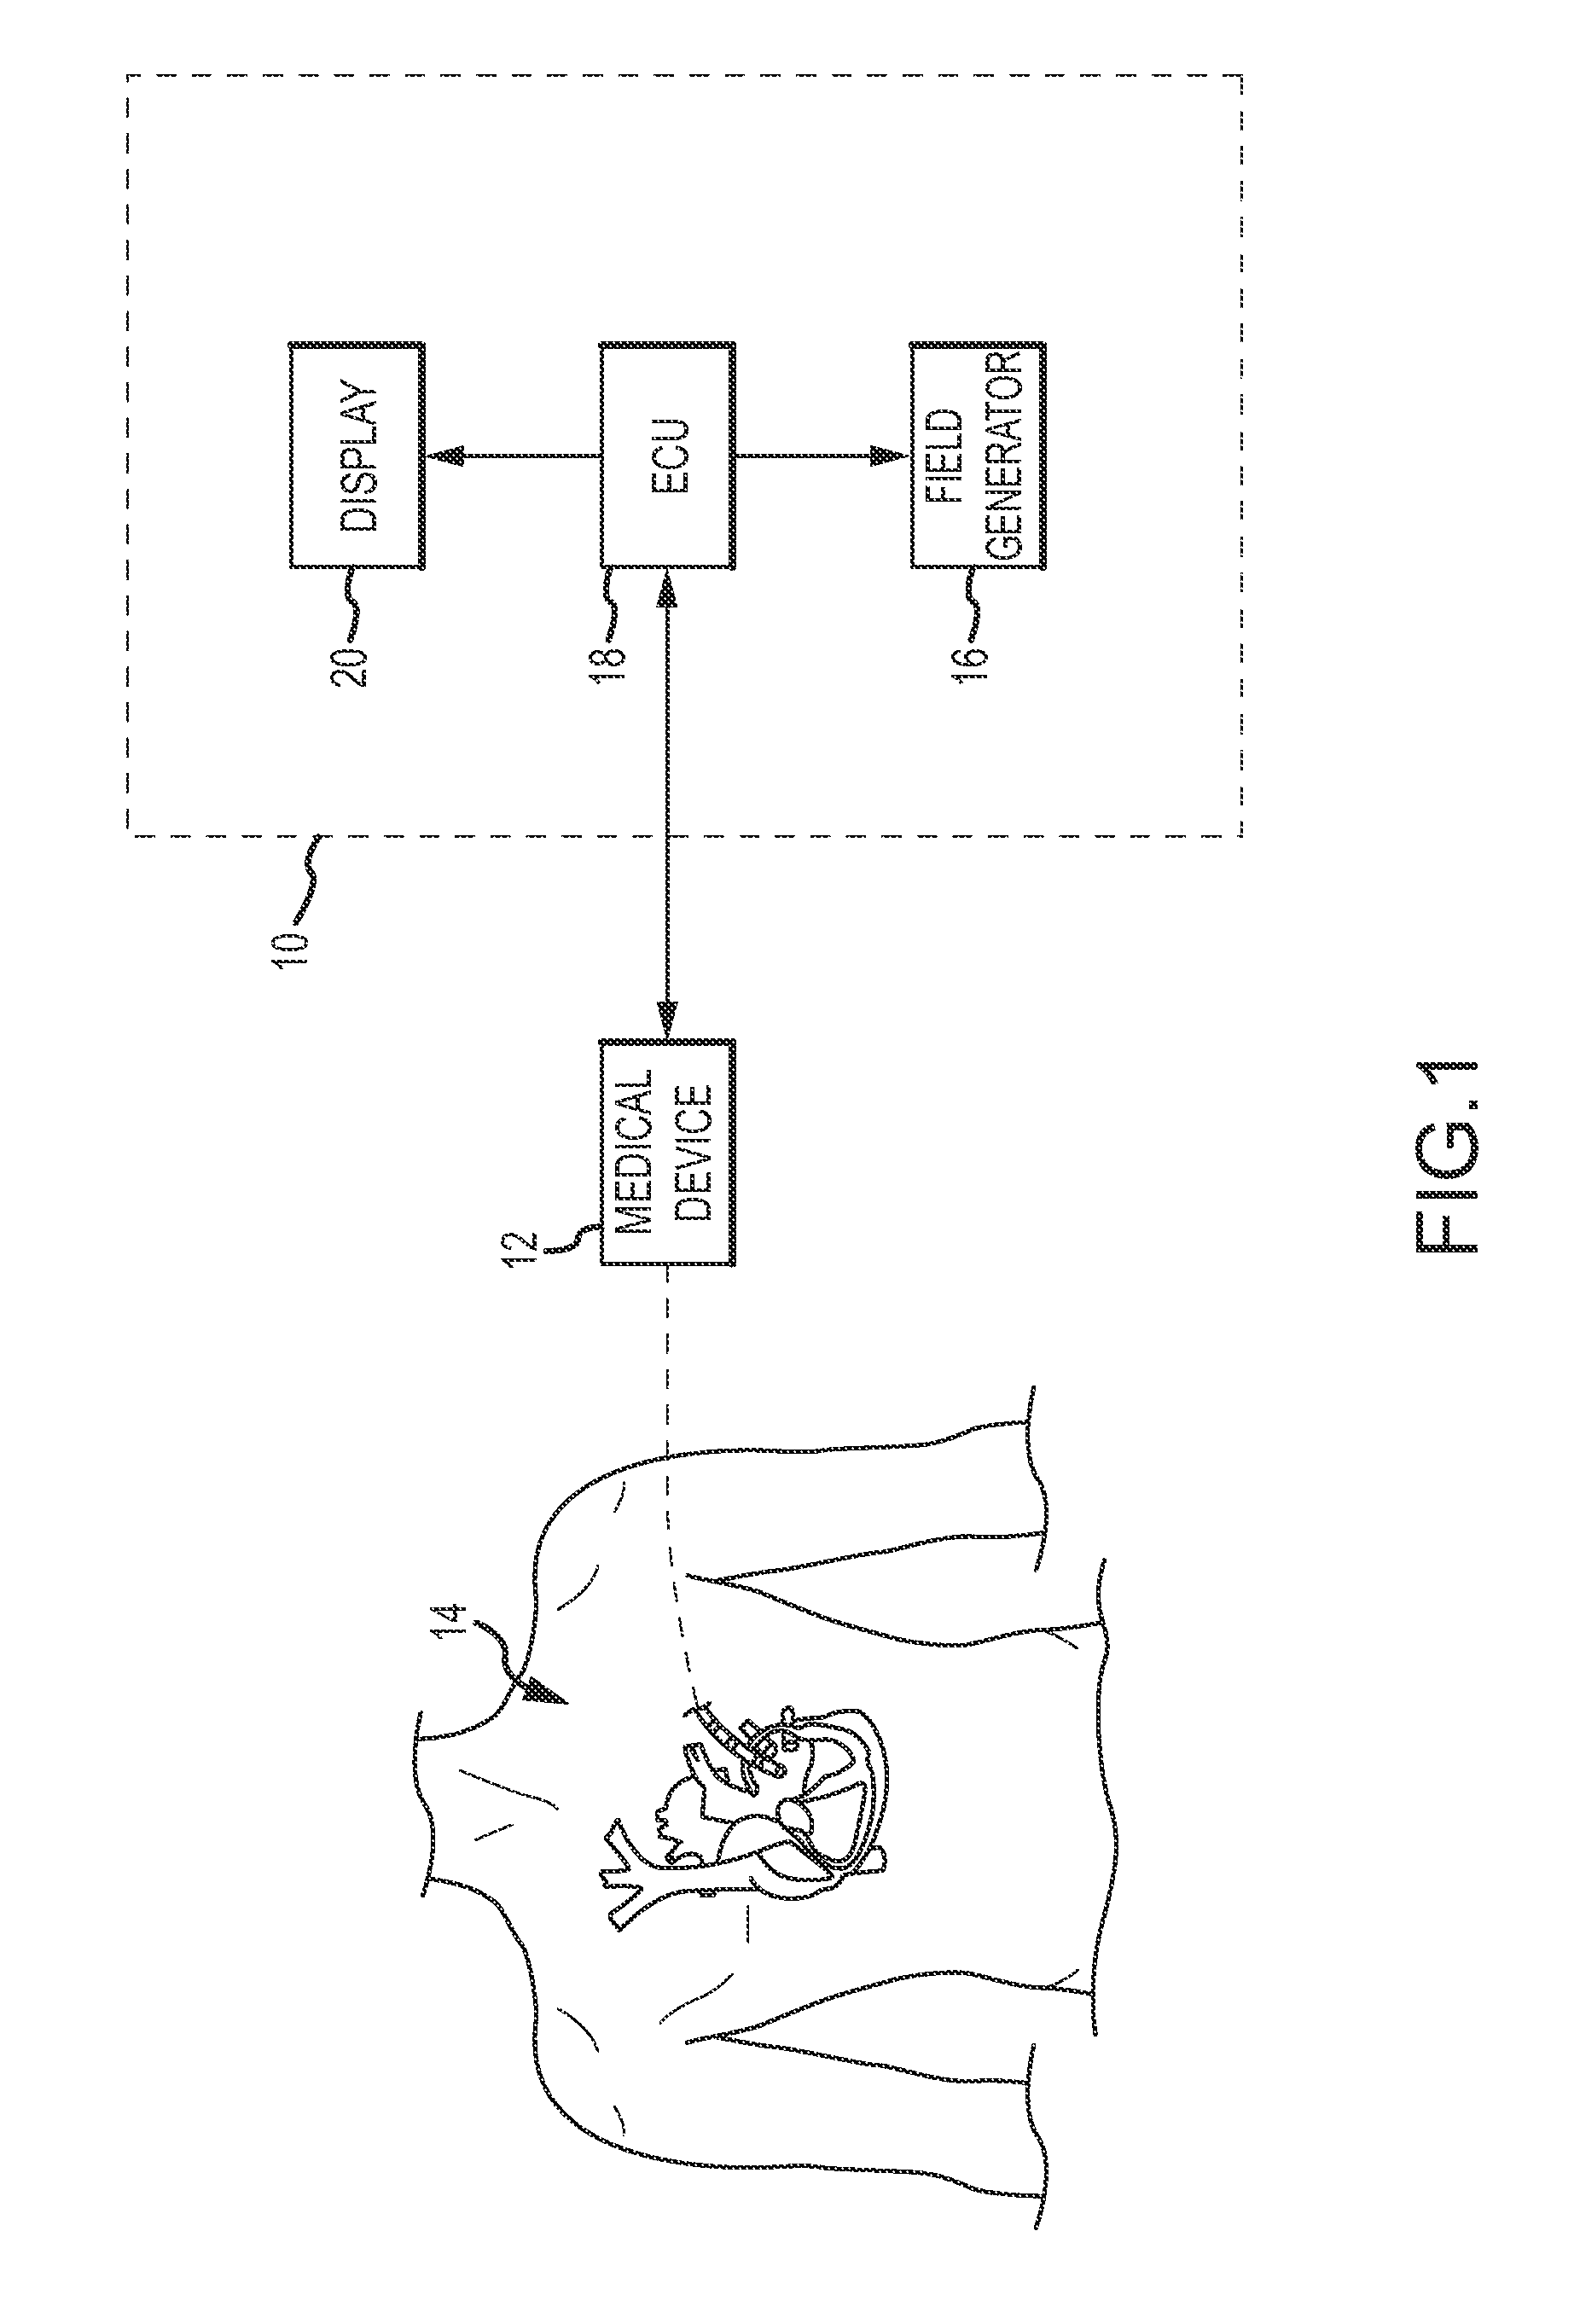 Reducing mechanical stress on conductors and connection points in a position determinable interventional medical device